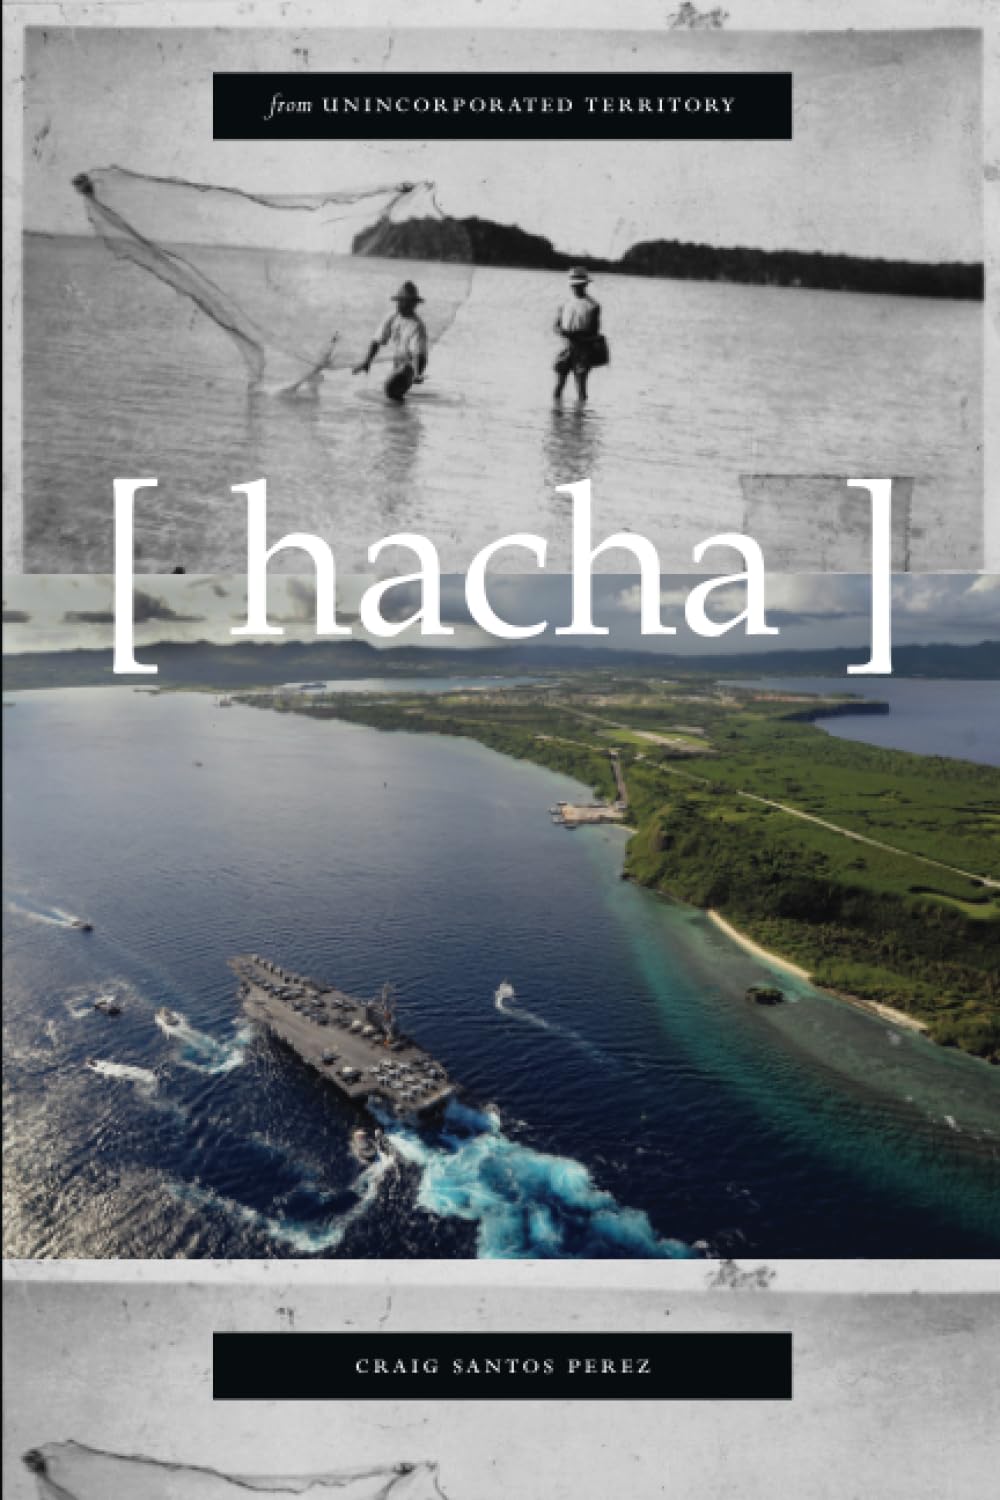 from unincorporated territory [hacha] by Craig Santos Perez